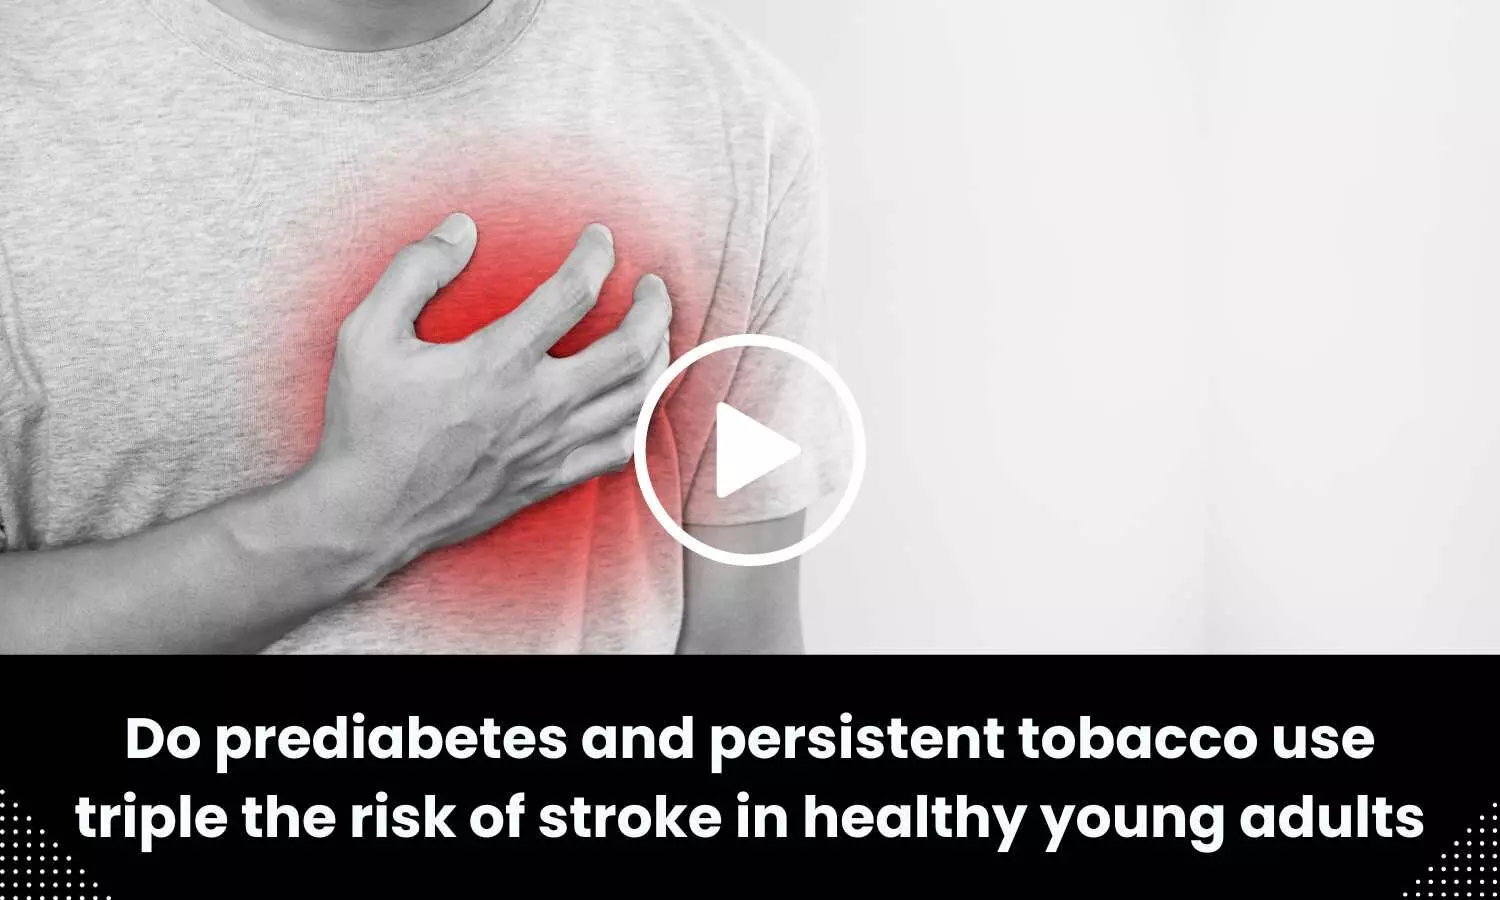 Do prediabetes and persistent tobacco use triple the risk of stroke in healthy young adults